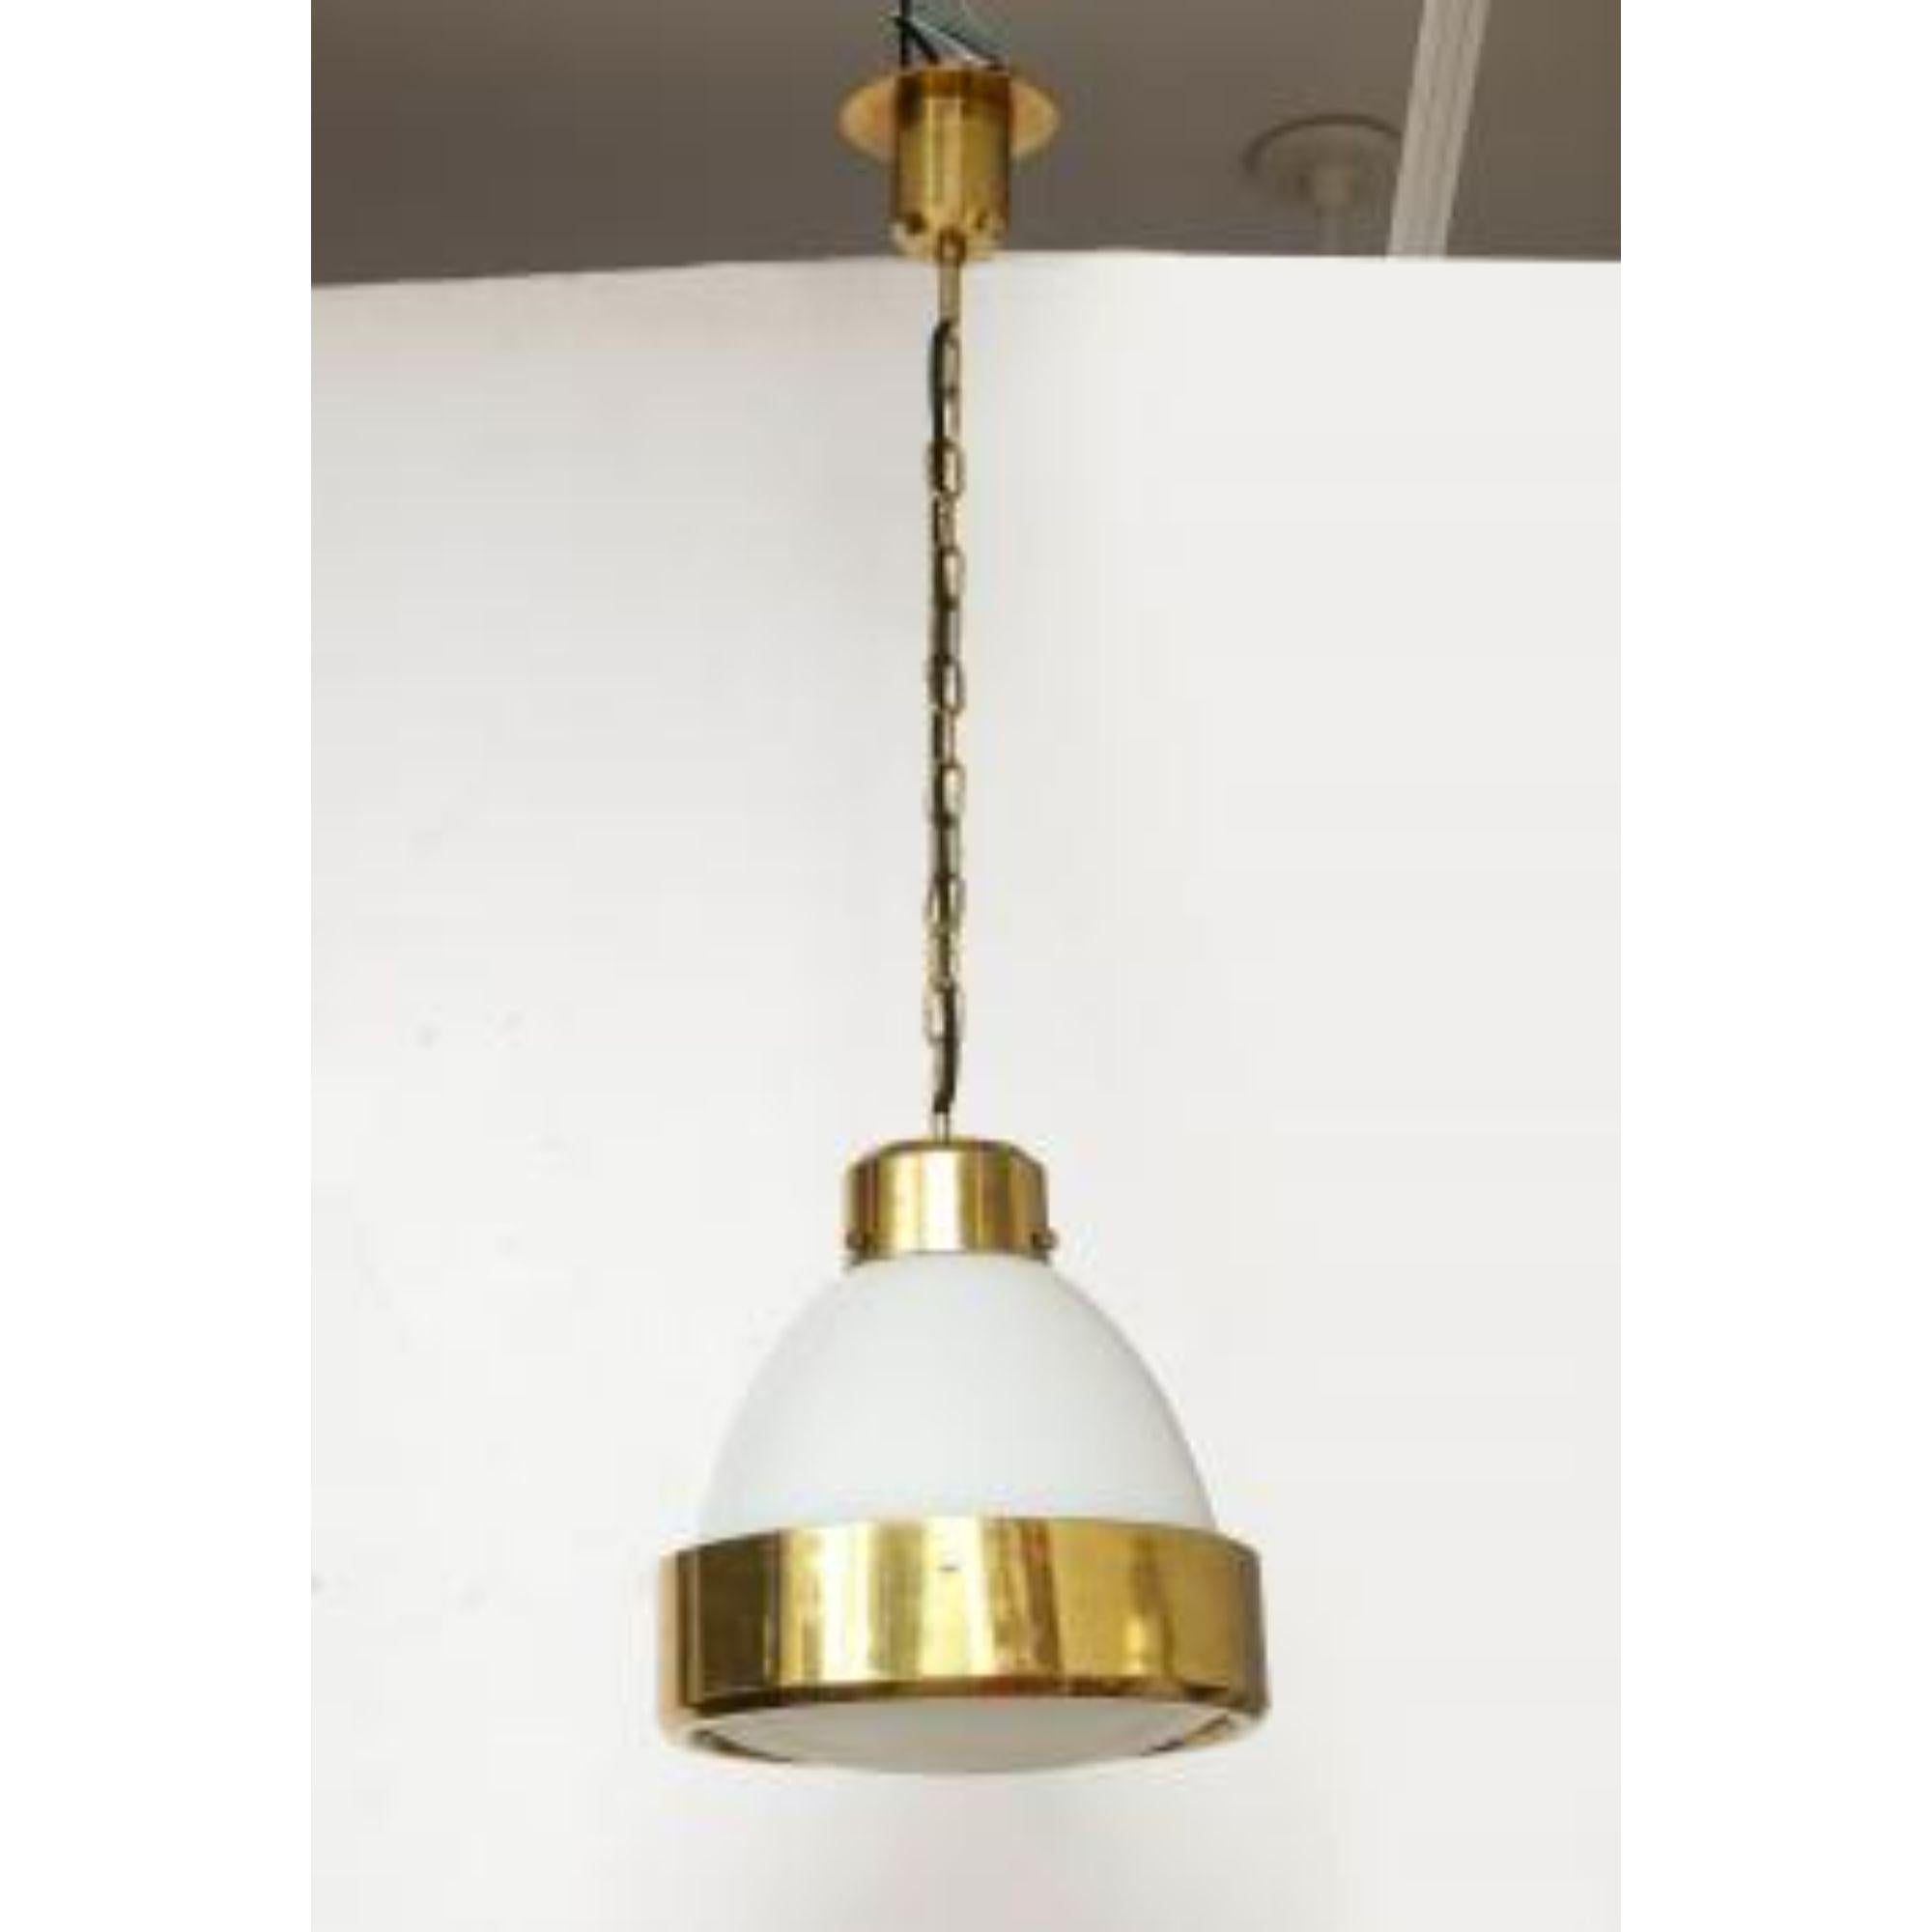 Midcentury Pendant in Brass and White Opaline Glass, Mid-20th Century For Sale 6